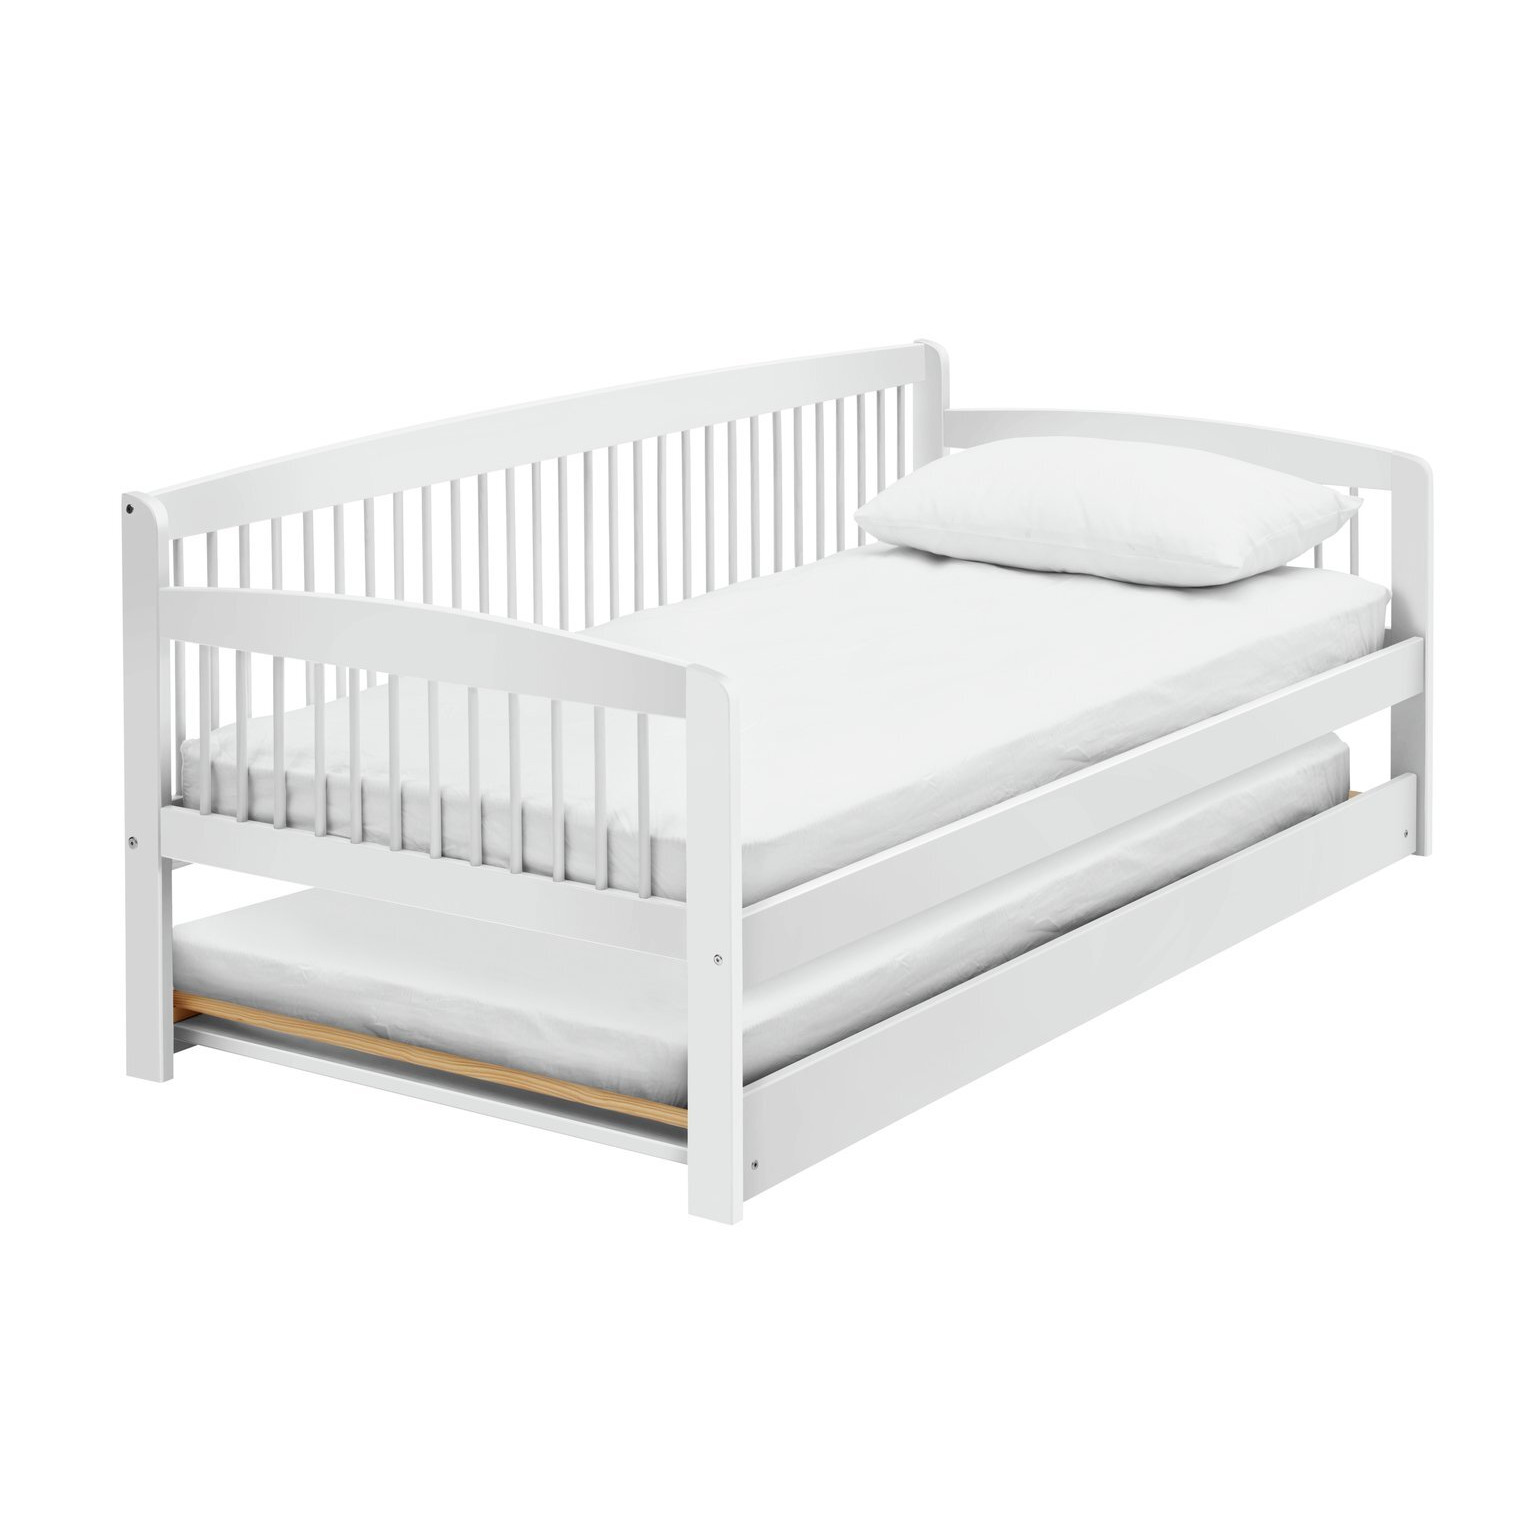 Argos Home Andover Wooden Day Bed and Trundle - White - image 1